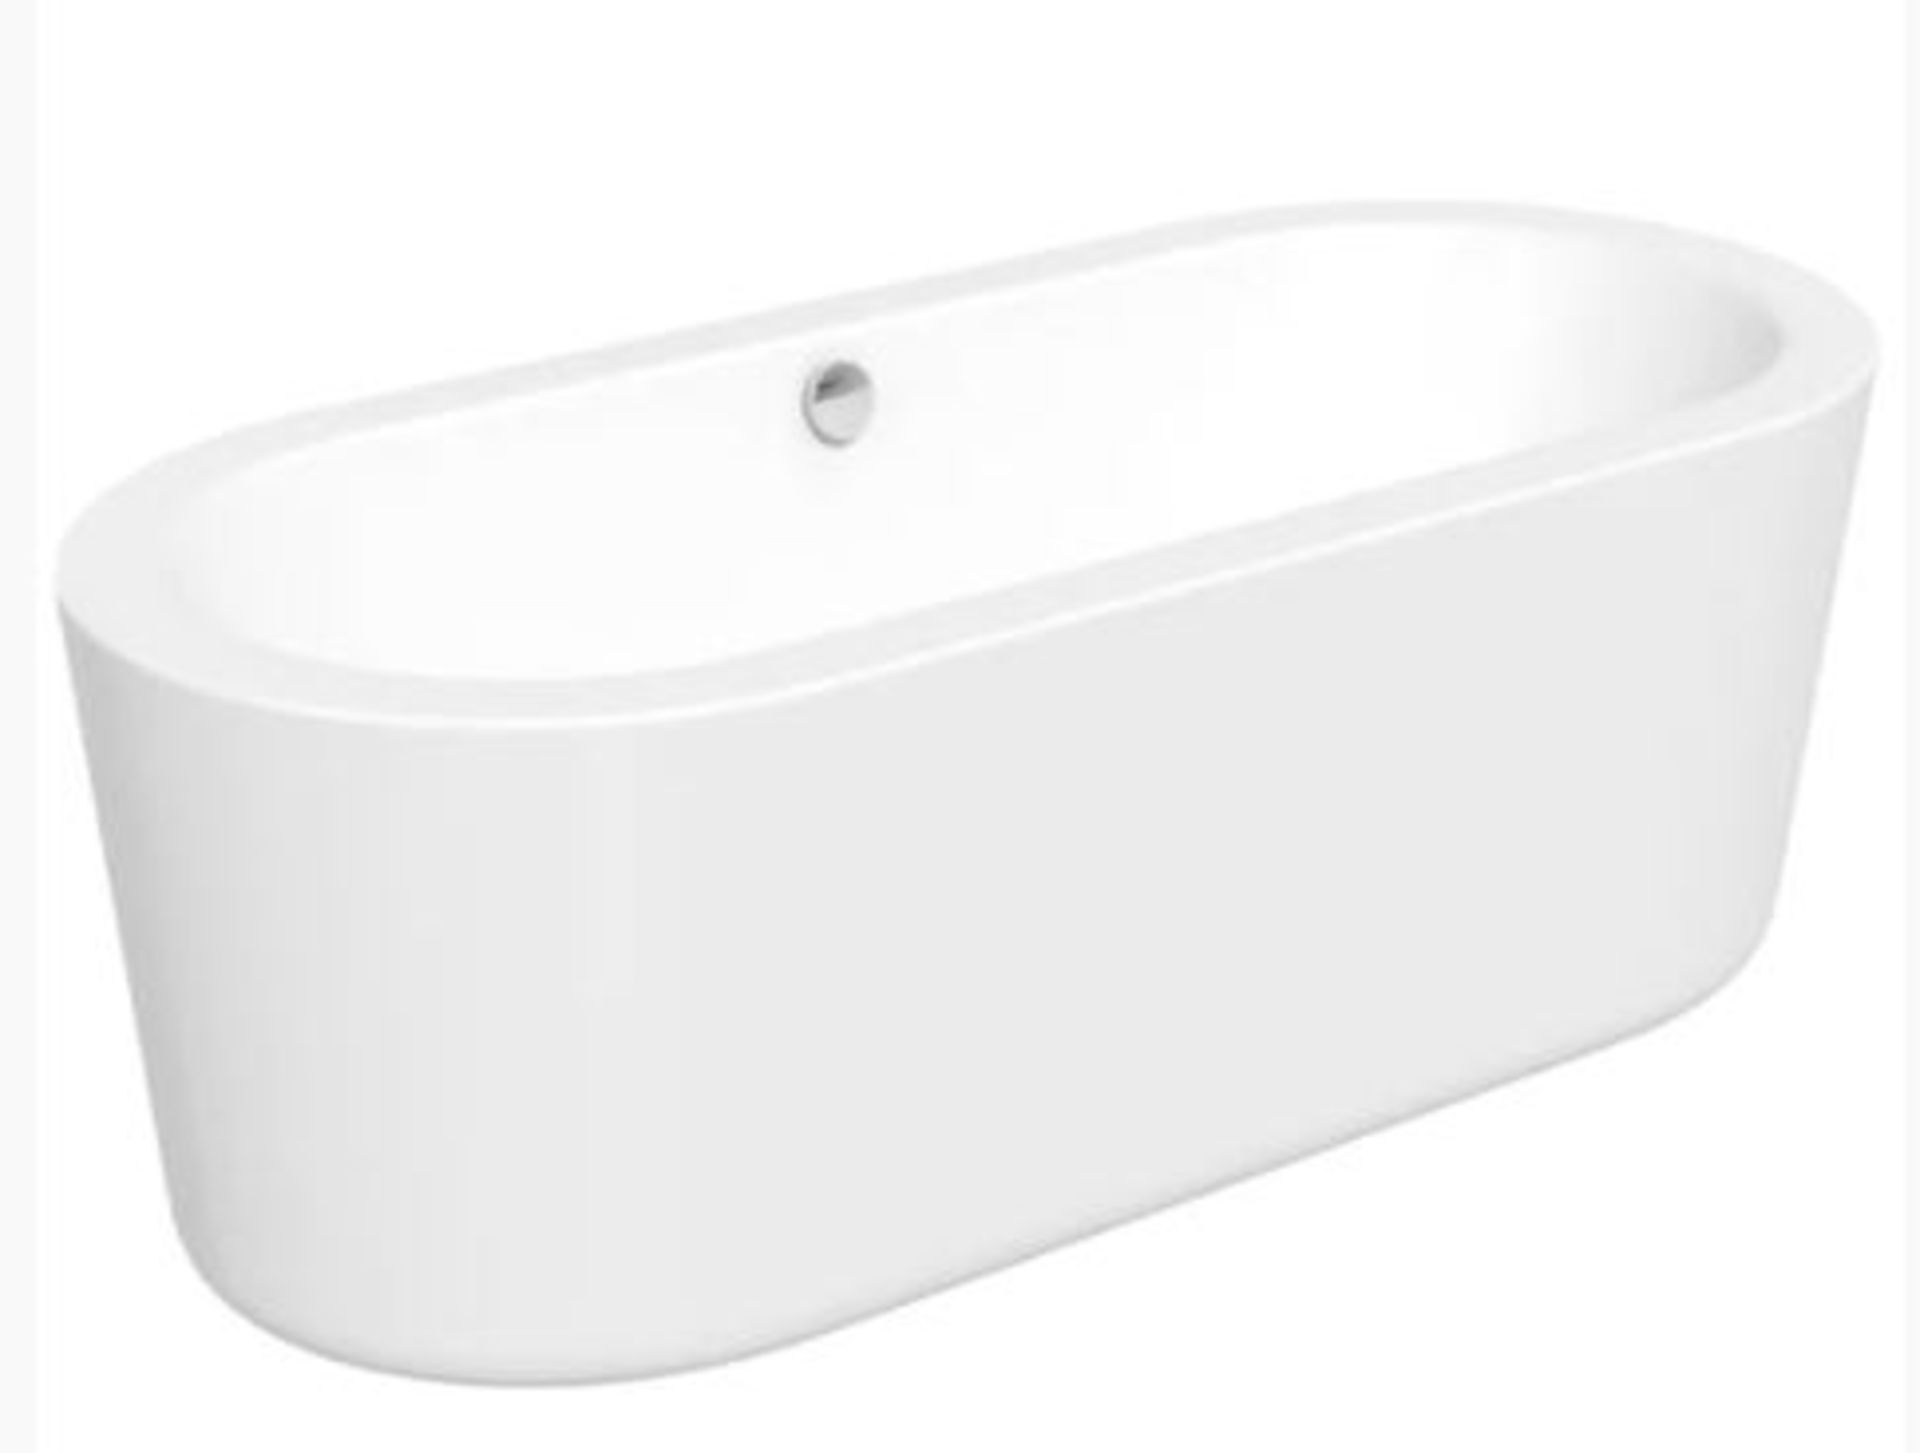 1 X Crescent Roll Top Bath Large (rtb08)RRP £559 - Image 5 of 7